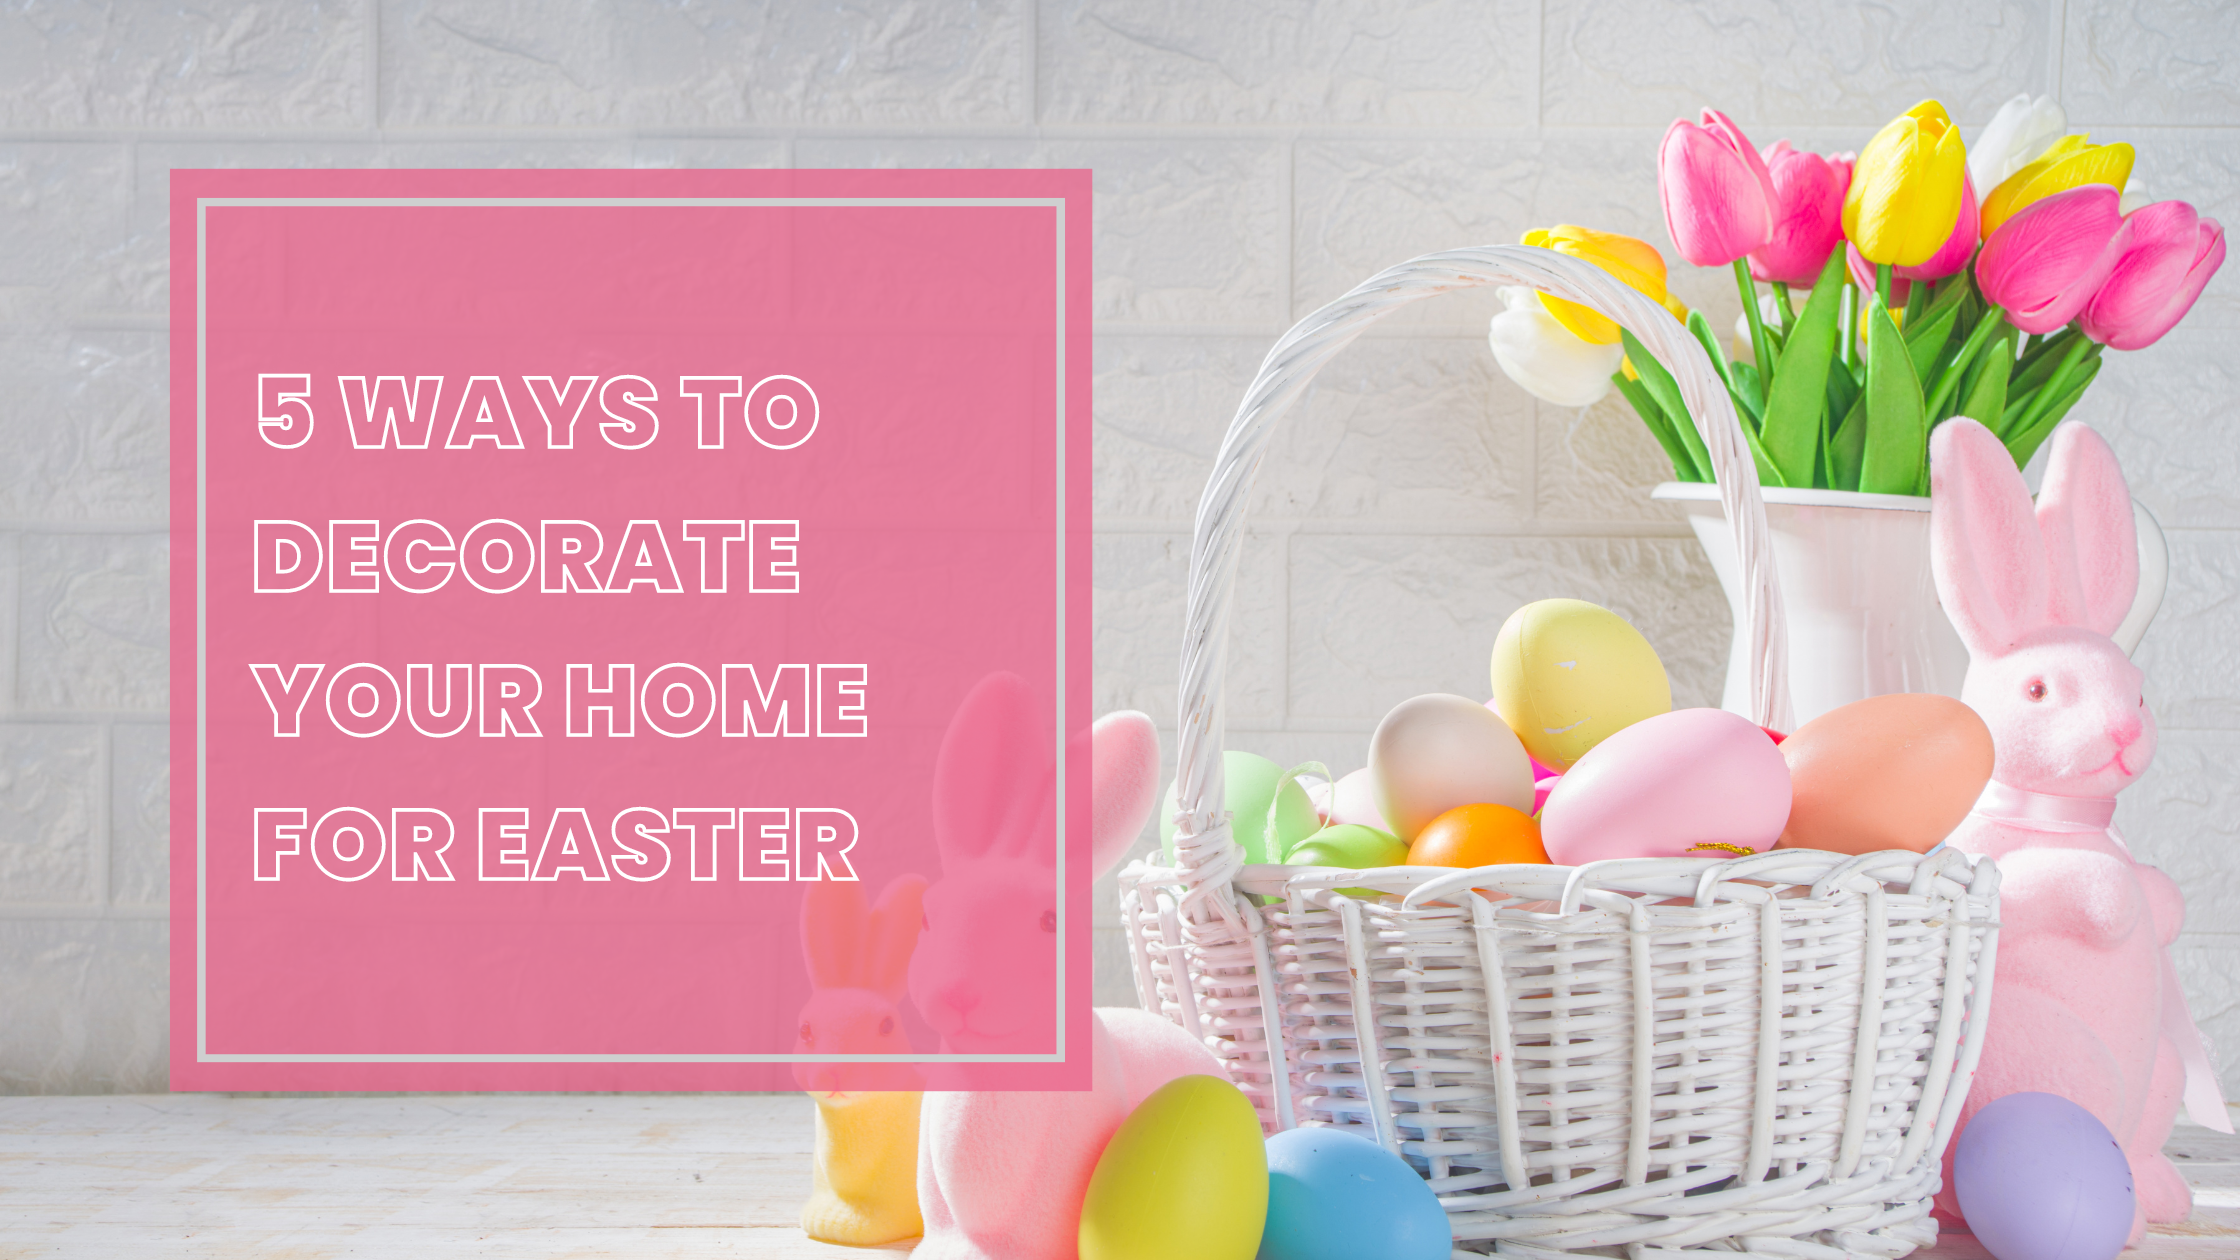 5 WAYS TO DECORATE YOUR HOME FOR EASTER